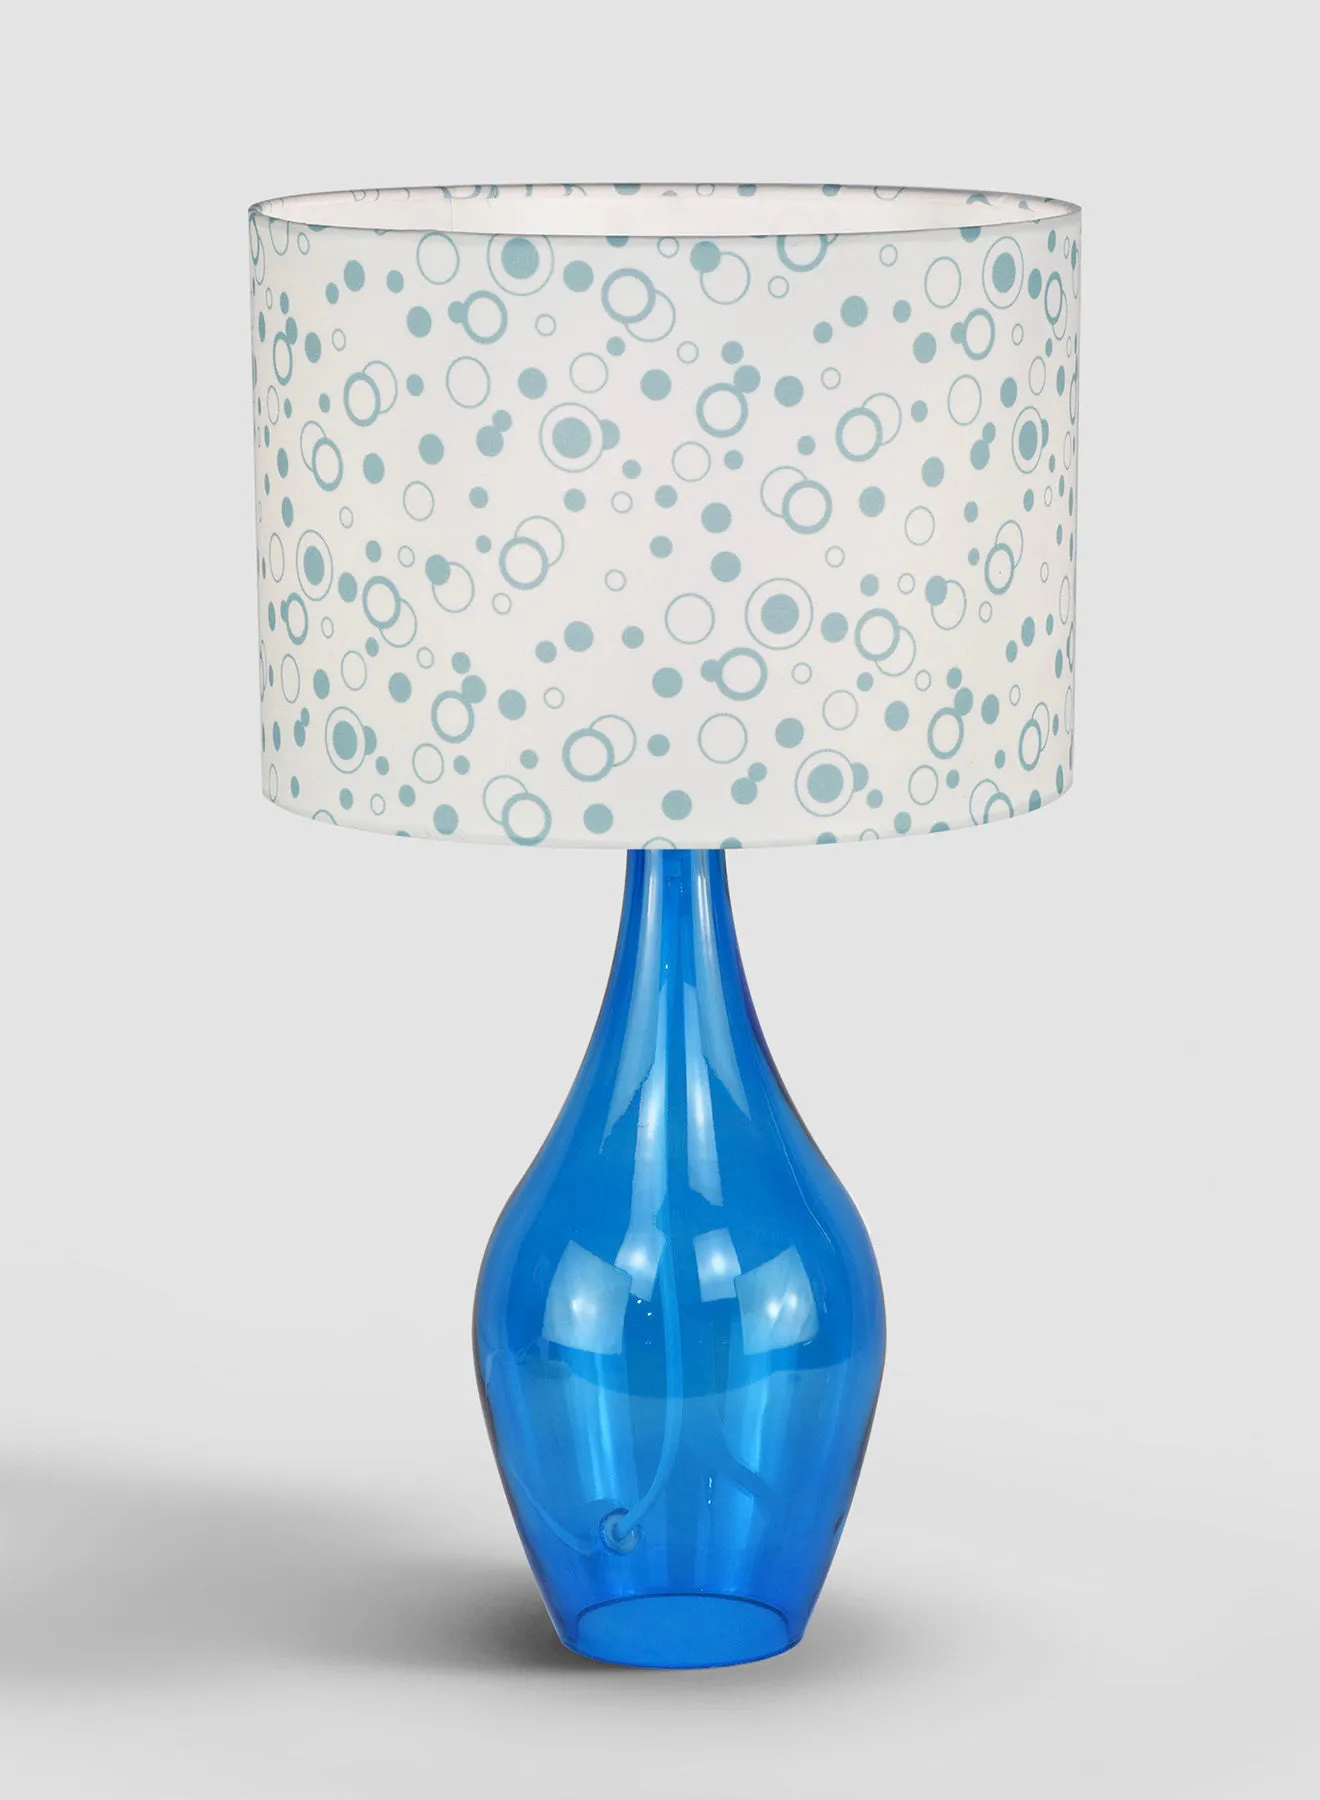 Switch Vial Glass Table Lamp Unique Luxury Quality Material for the Perfect Stylish Home LT2105 Blue 24 x 43 Blue 24 x 43cm